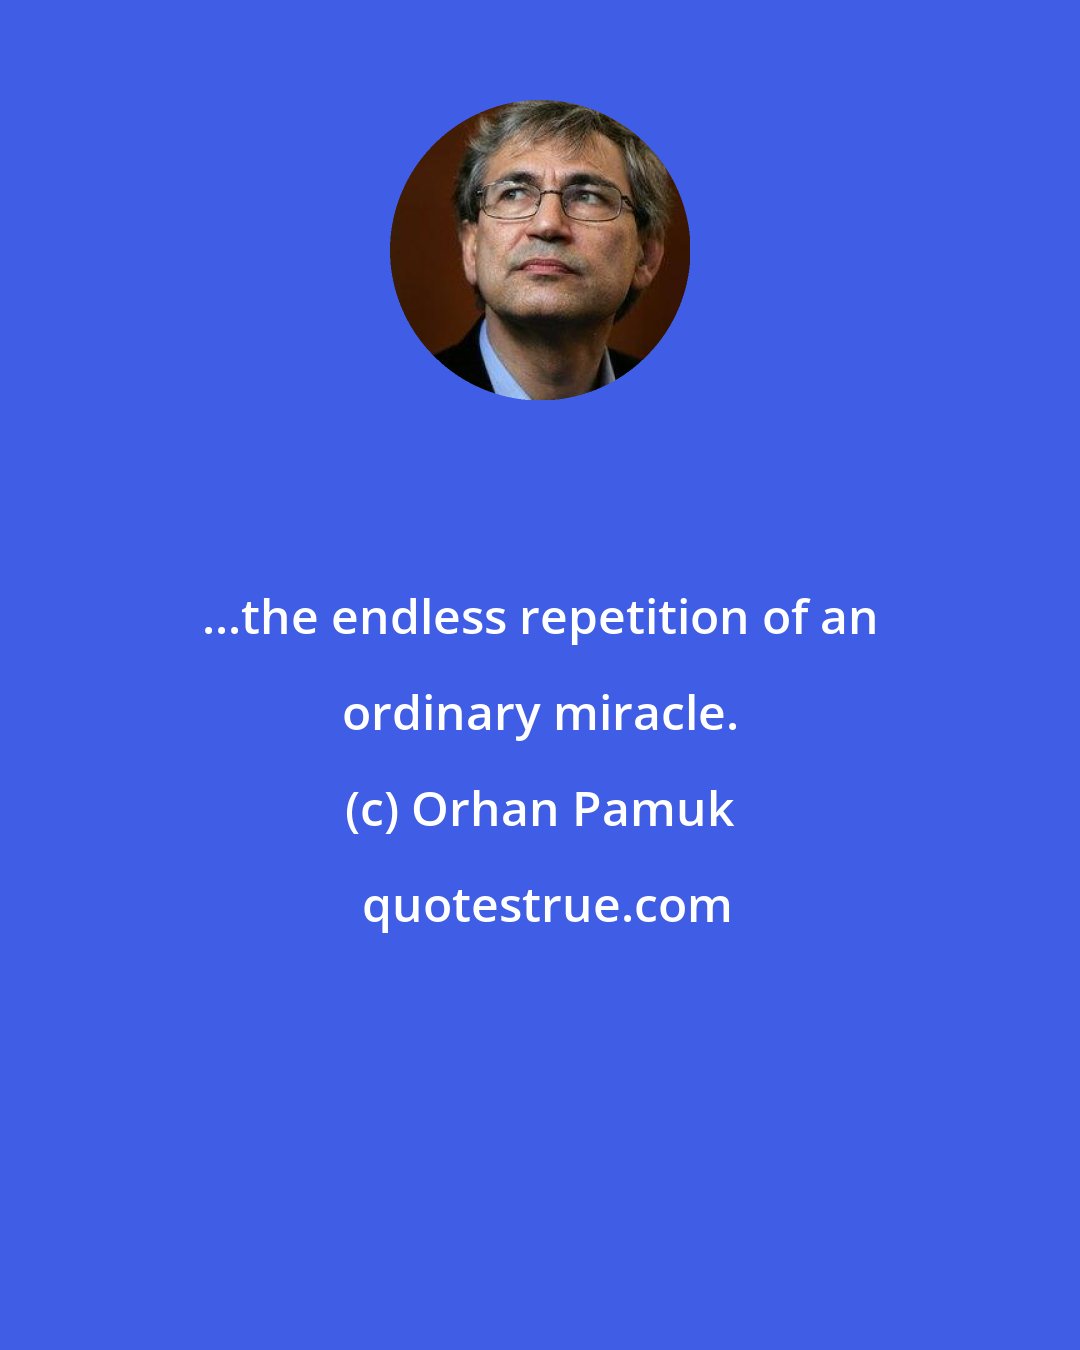 Orhan Pamuk: ...the endless repetition of an ordinary miracle.